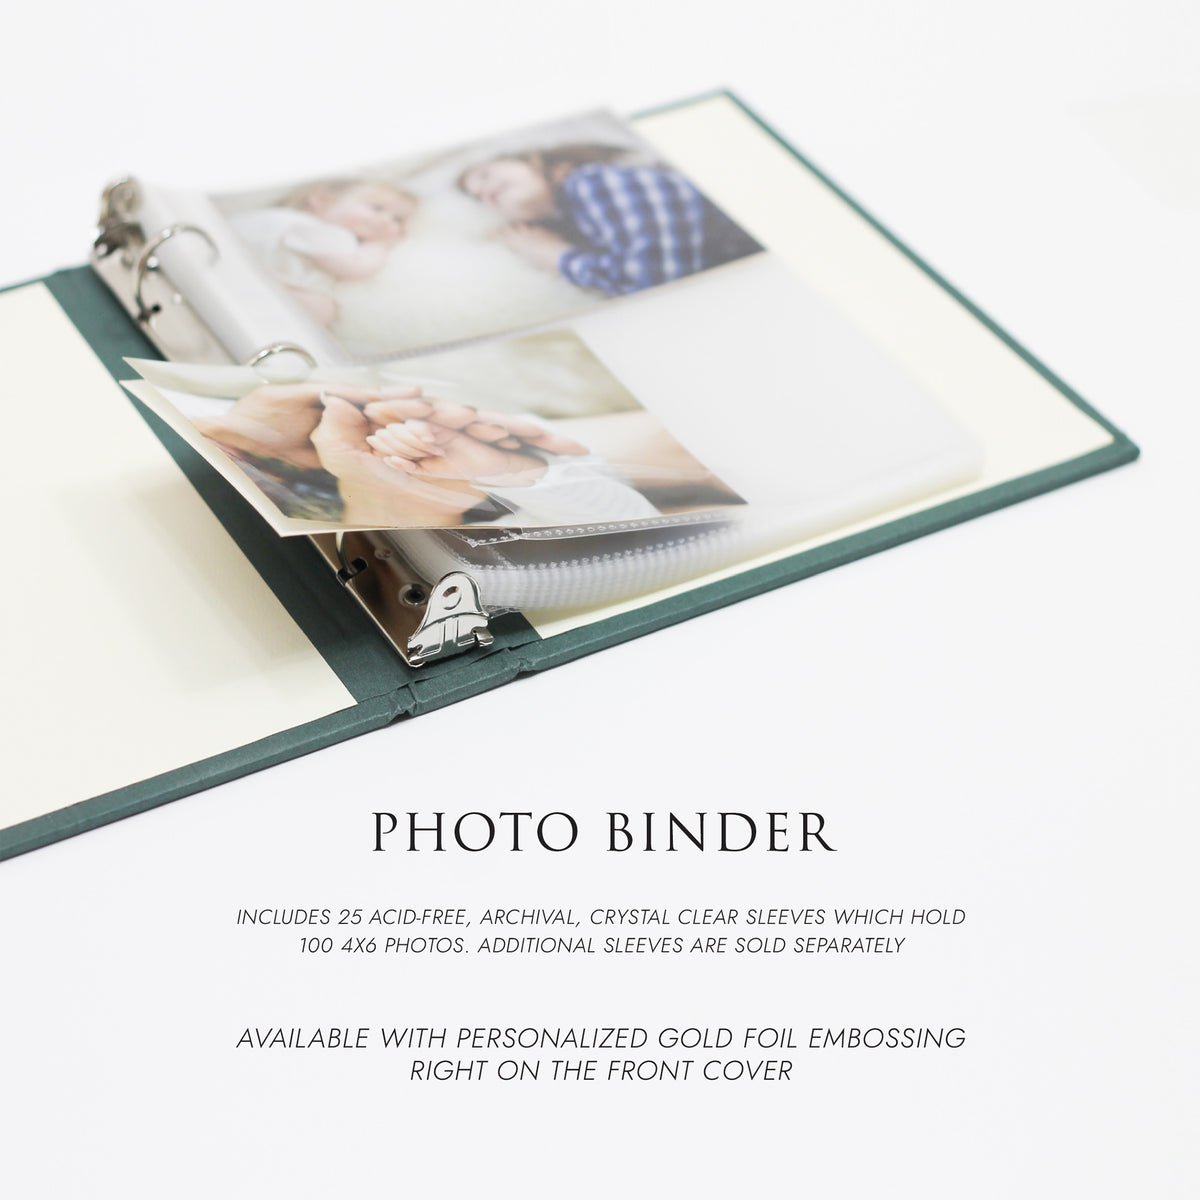 Medium Photo Binder For 4x6 Photos | Cover: Misty Blue Silk | Available Personalized